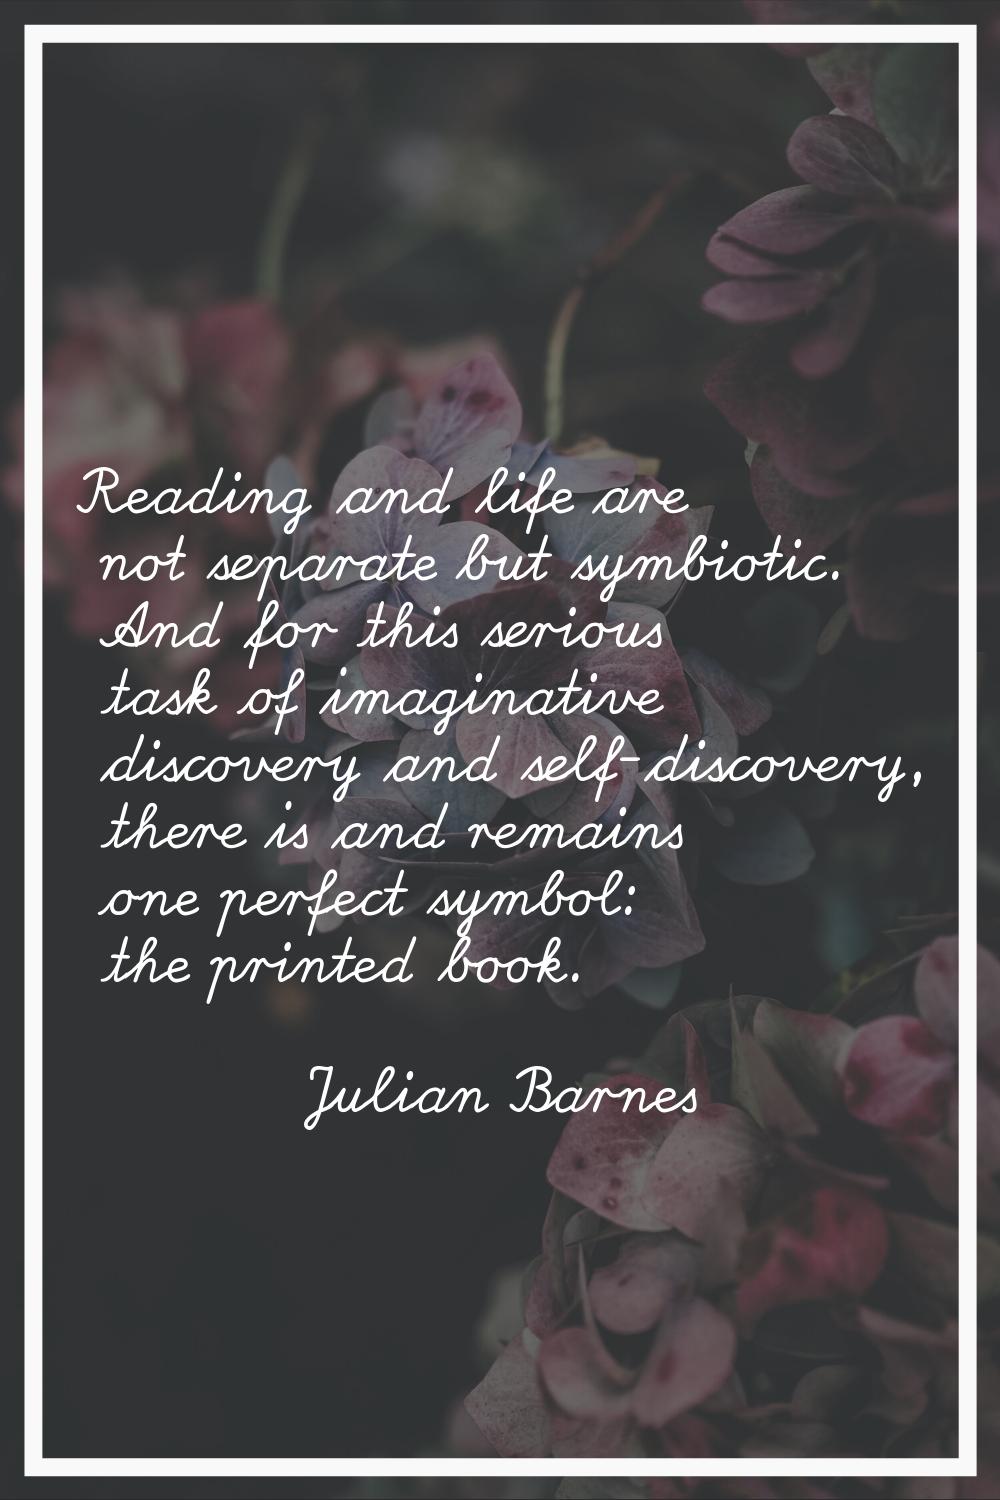 Reading and life are not separate but symbiotic. And for this serious task of imaginative discovery